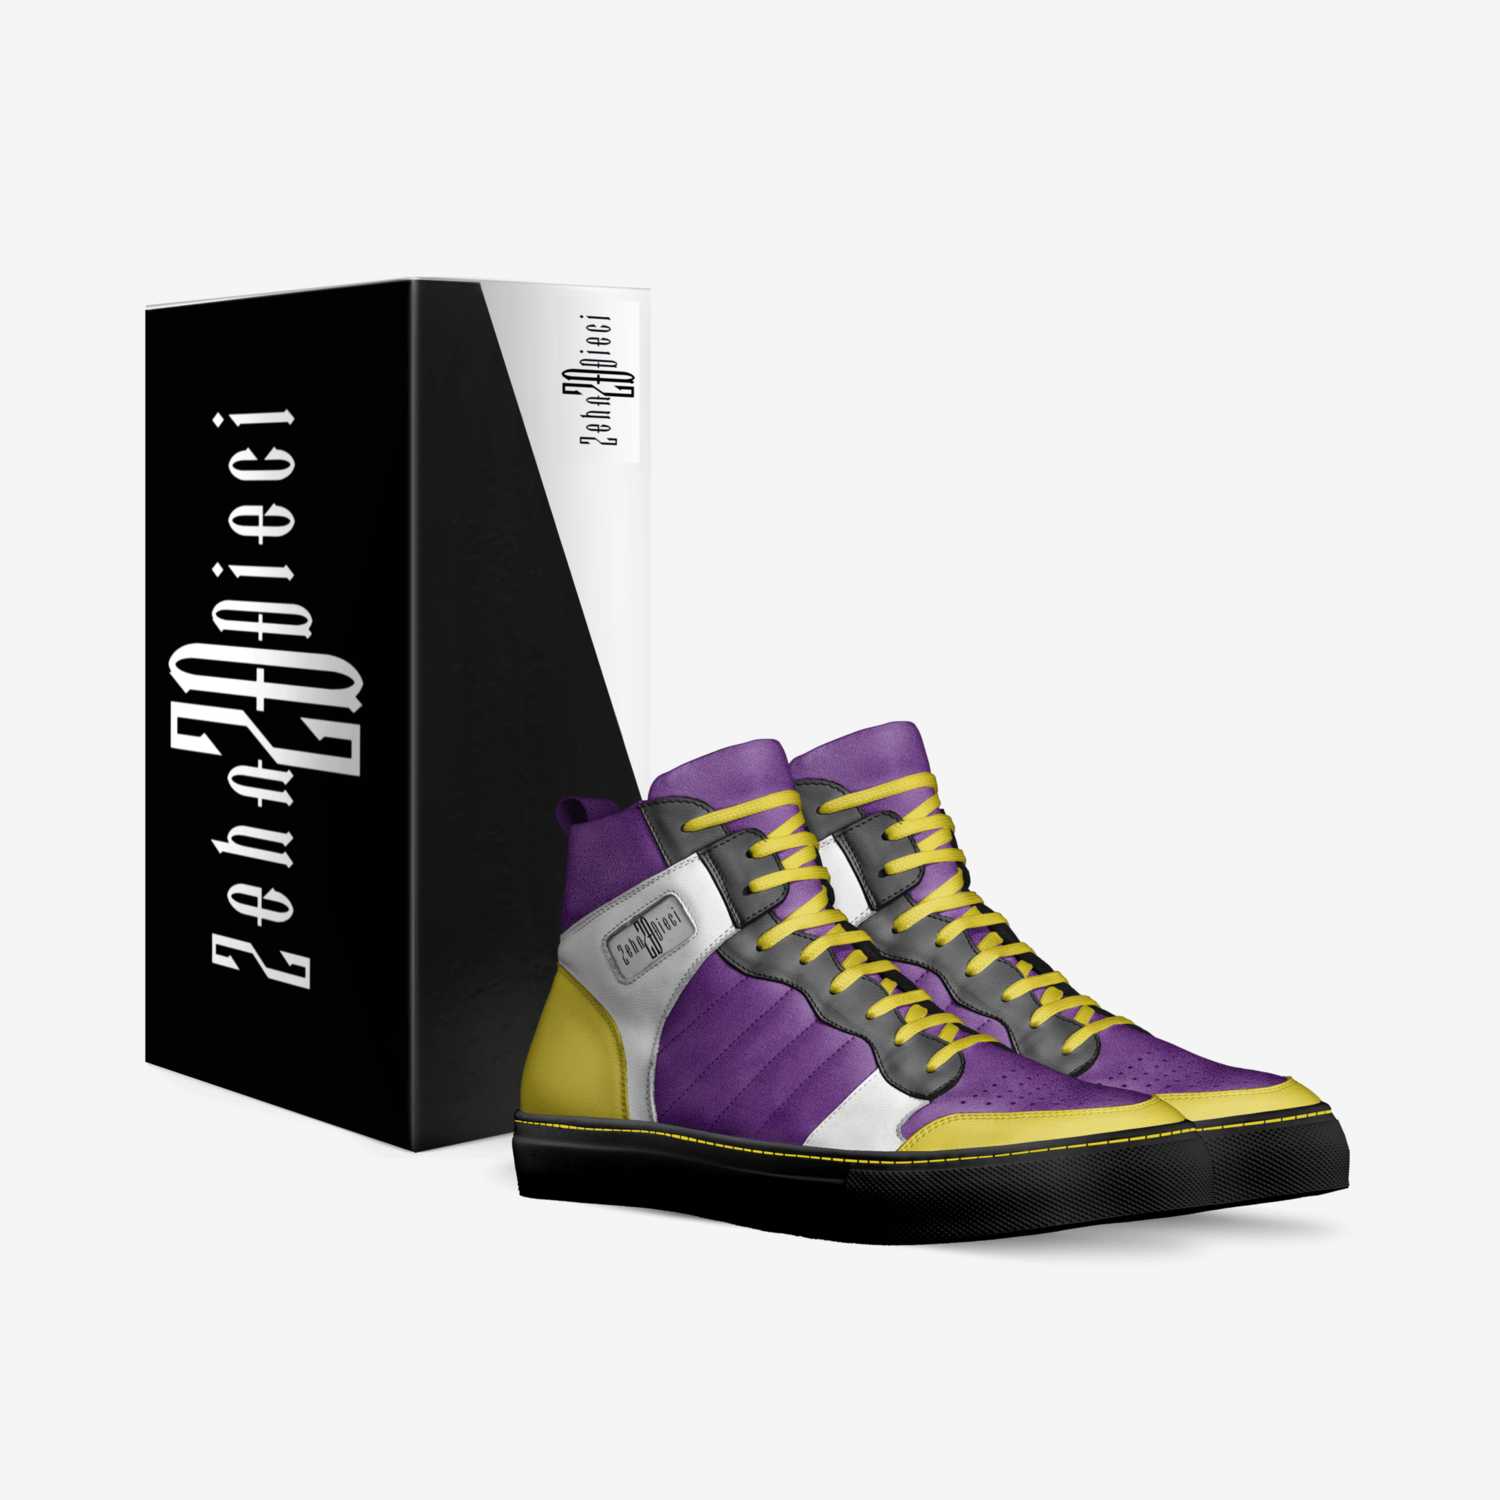 Dix 1 "Monarch" custom made in Italy shoes by Zehn Dieci | Box view